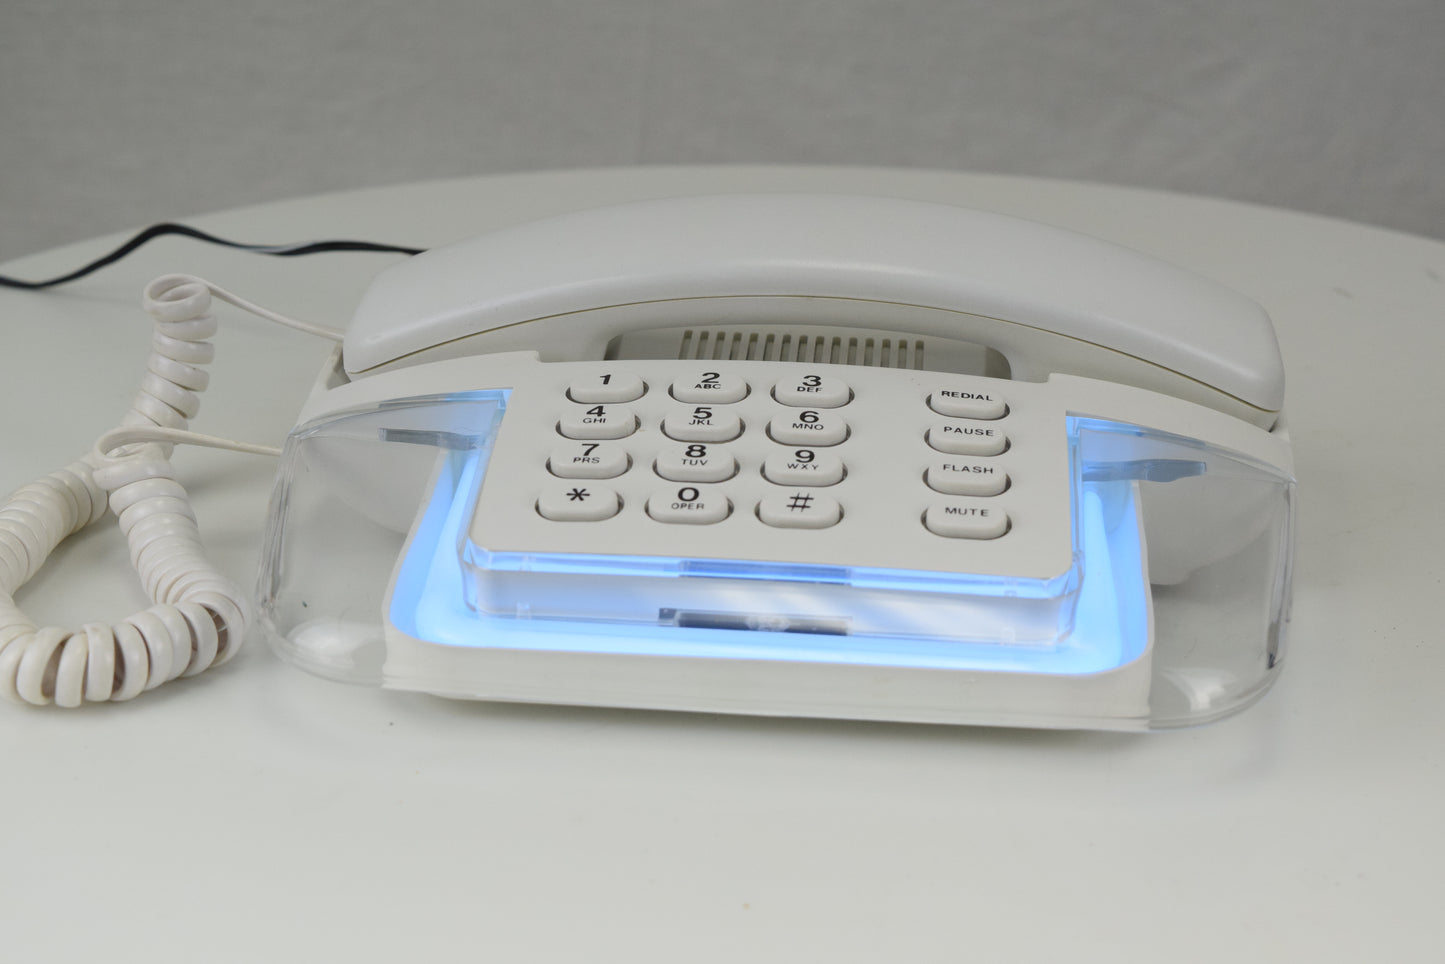 Neon Glow Telephone - White/Clear with Blue Light